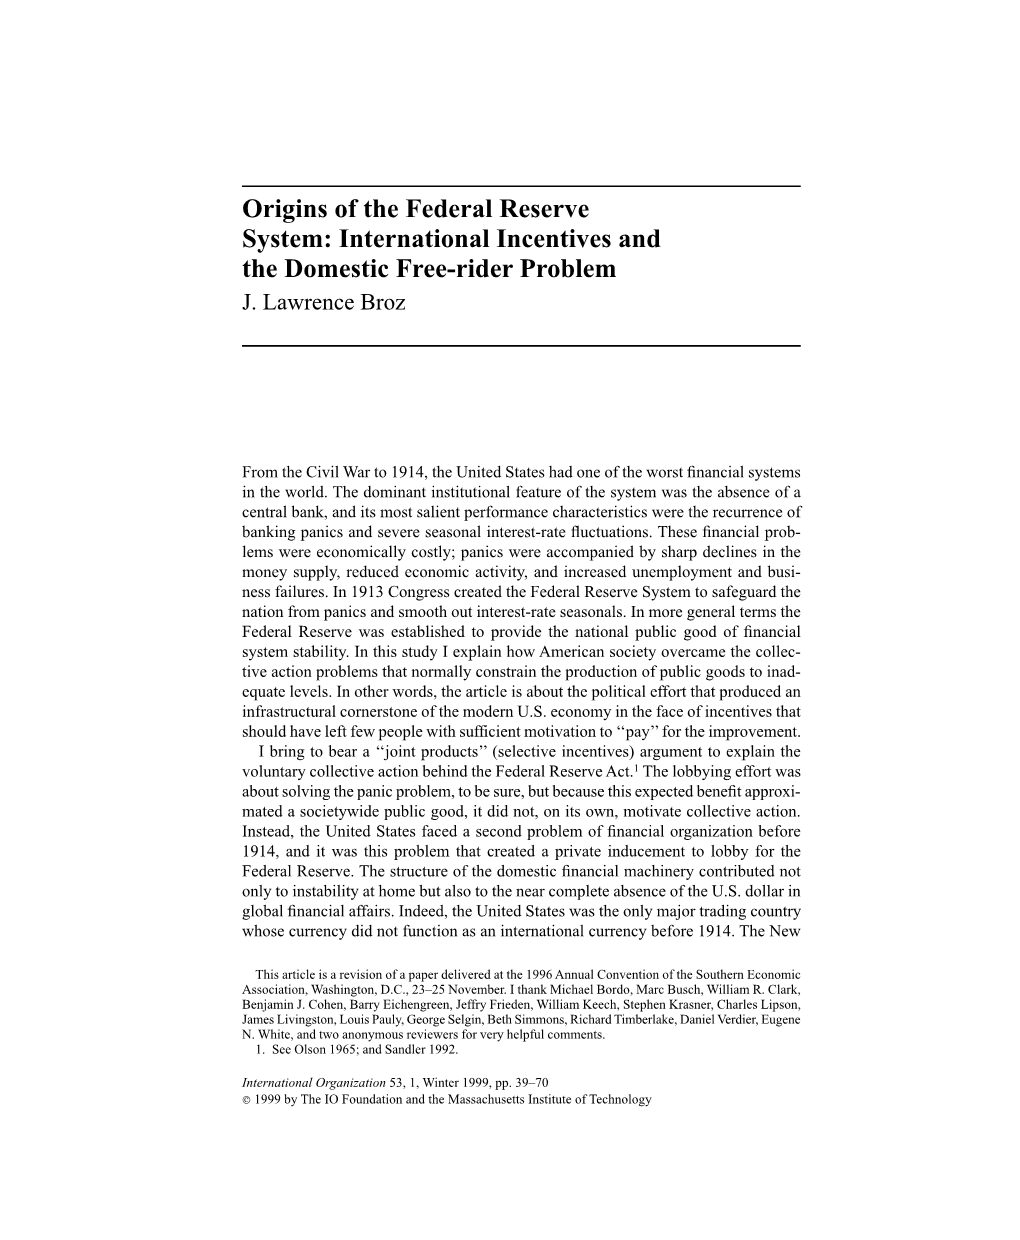 Origins of the Federal Reserve System: International Incentives and the Domestic Free-Rider Problem J